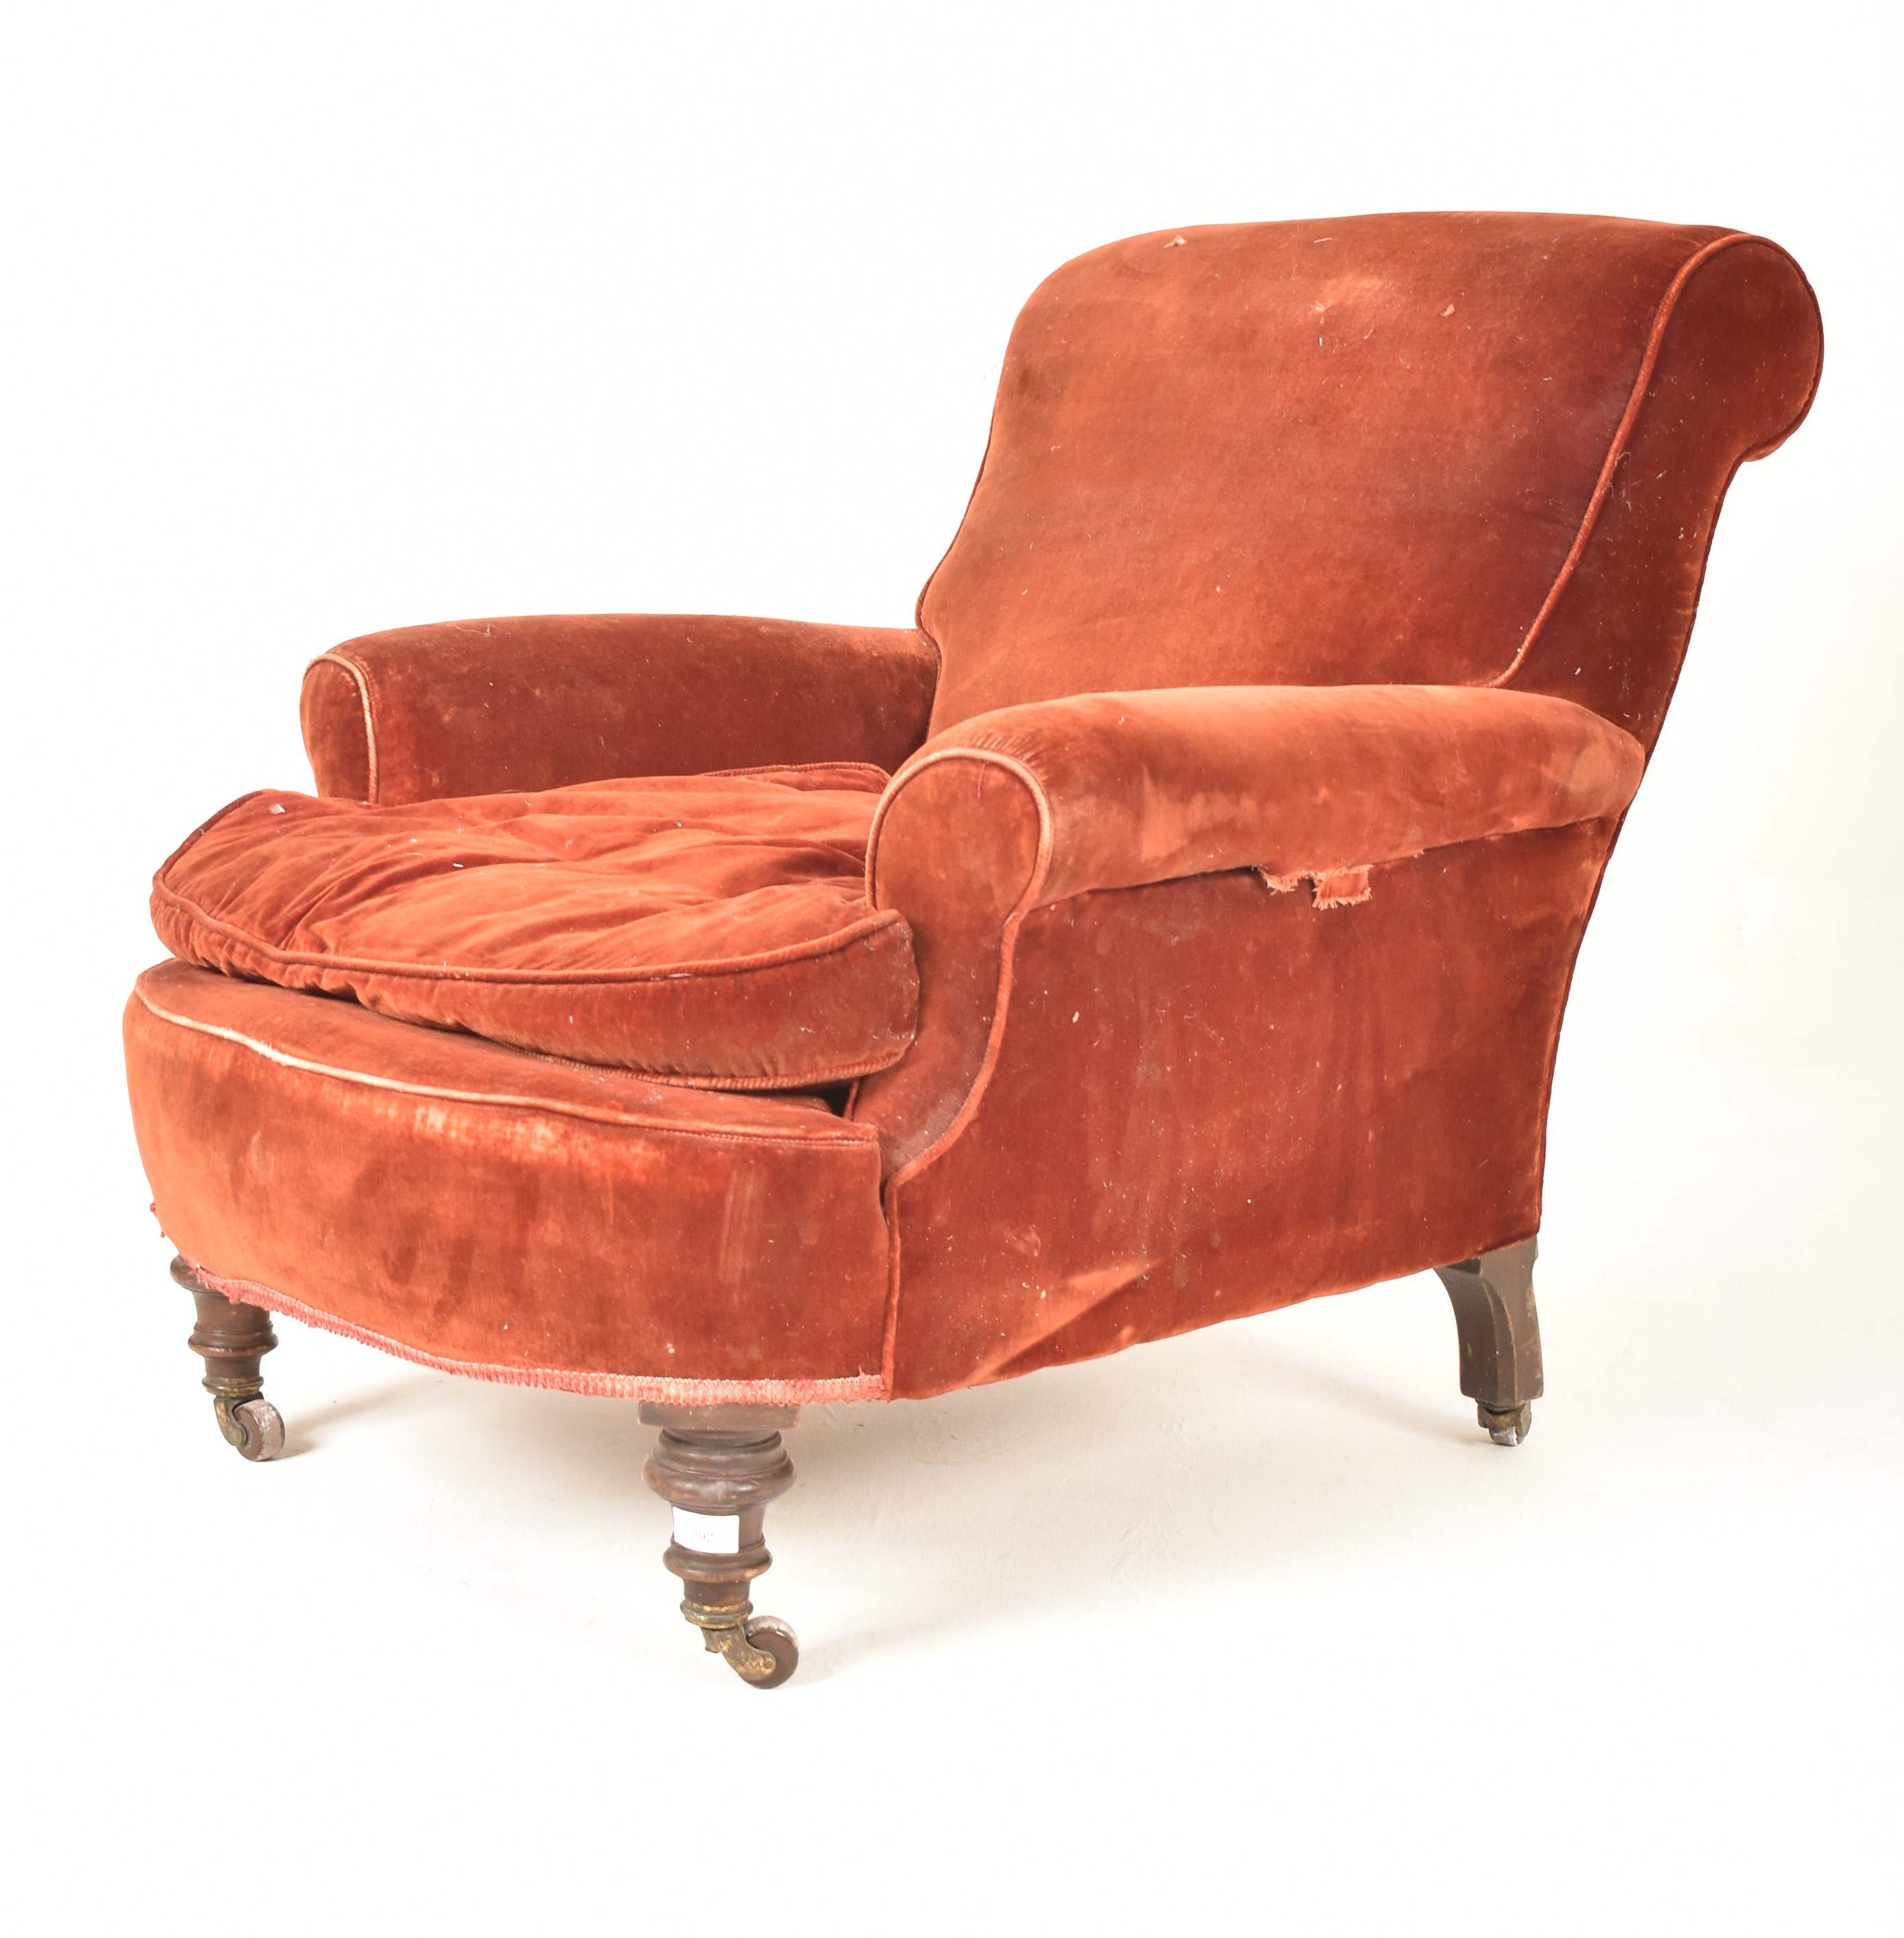 VICTORIAN UPHOLSTERED ARMCHAIR MANNER OF HOWARD & SONS - Image 4 of 6